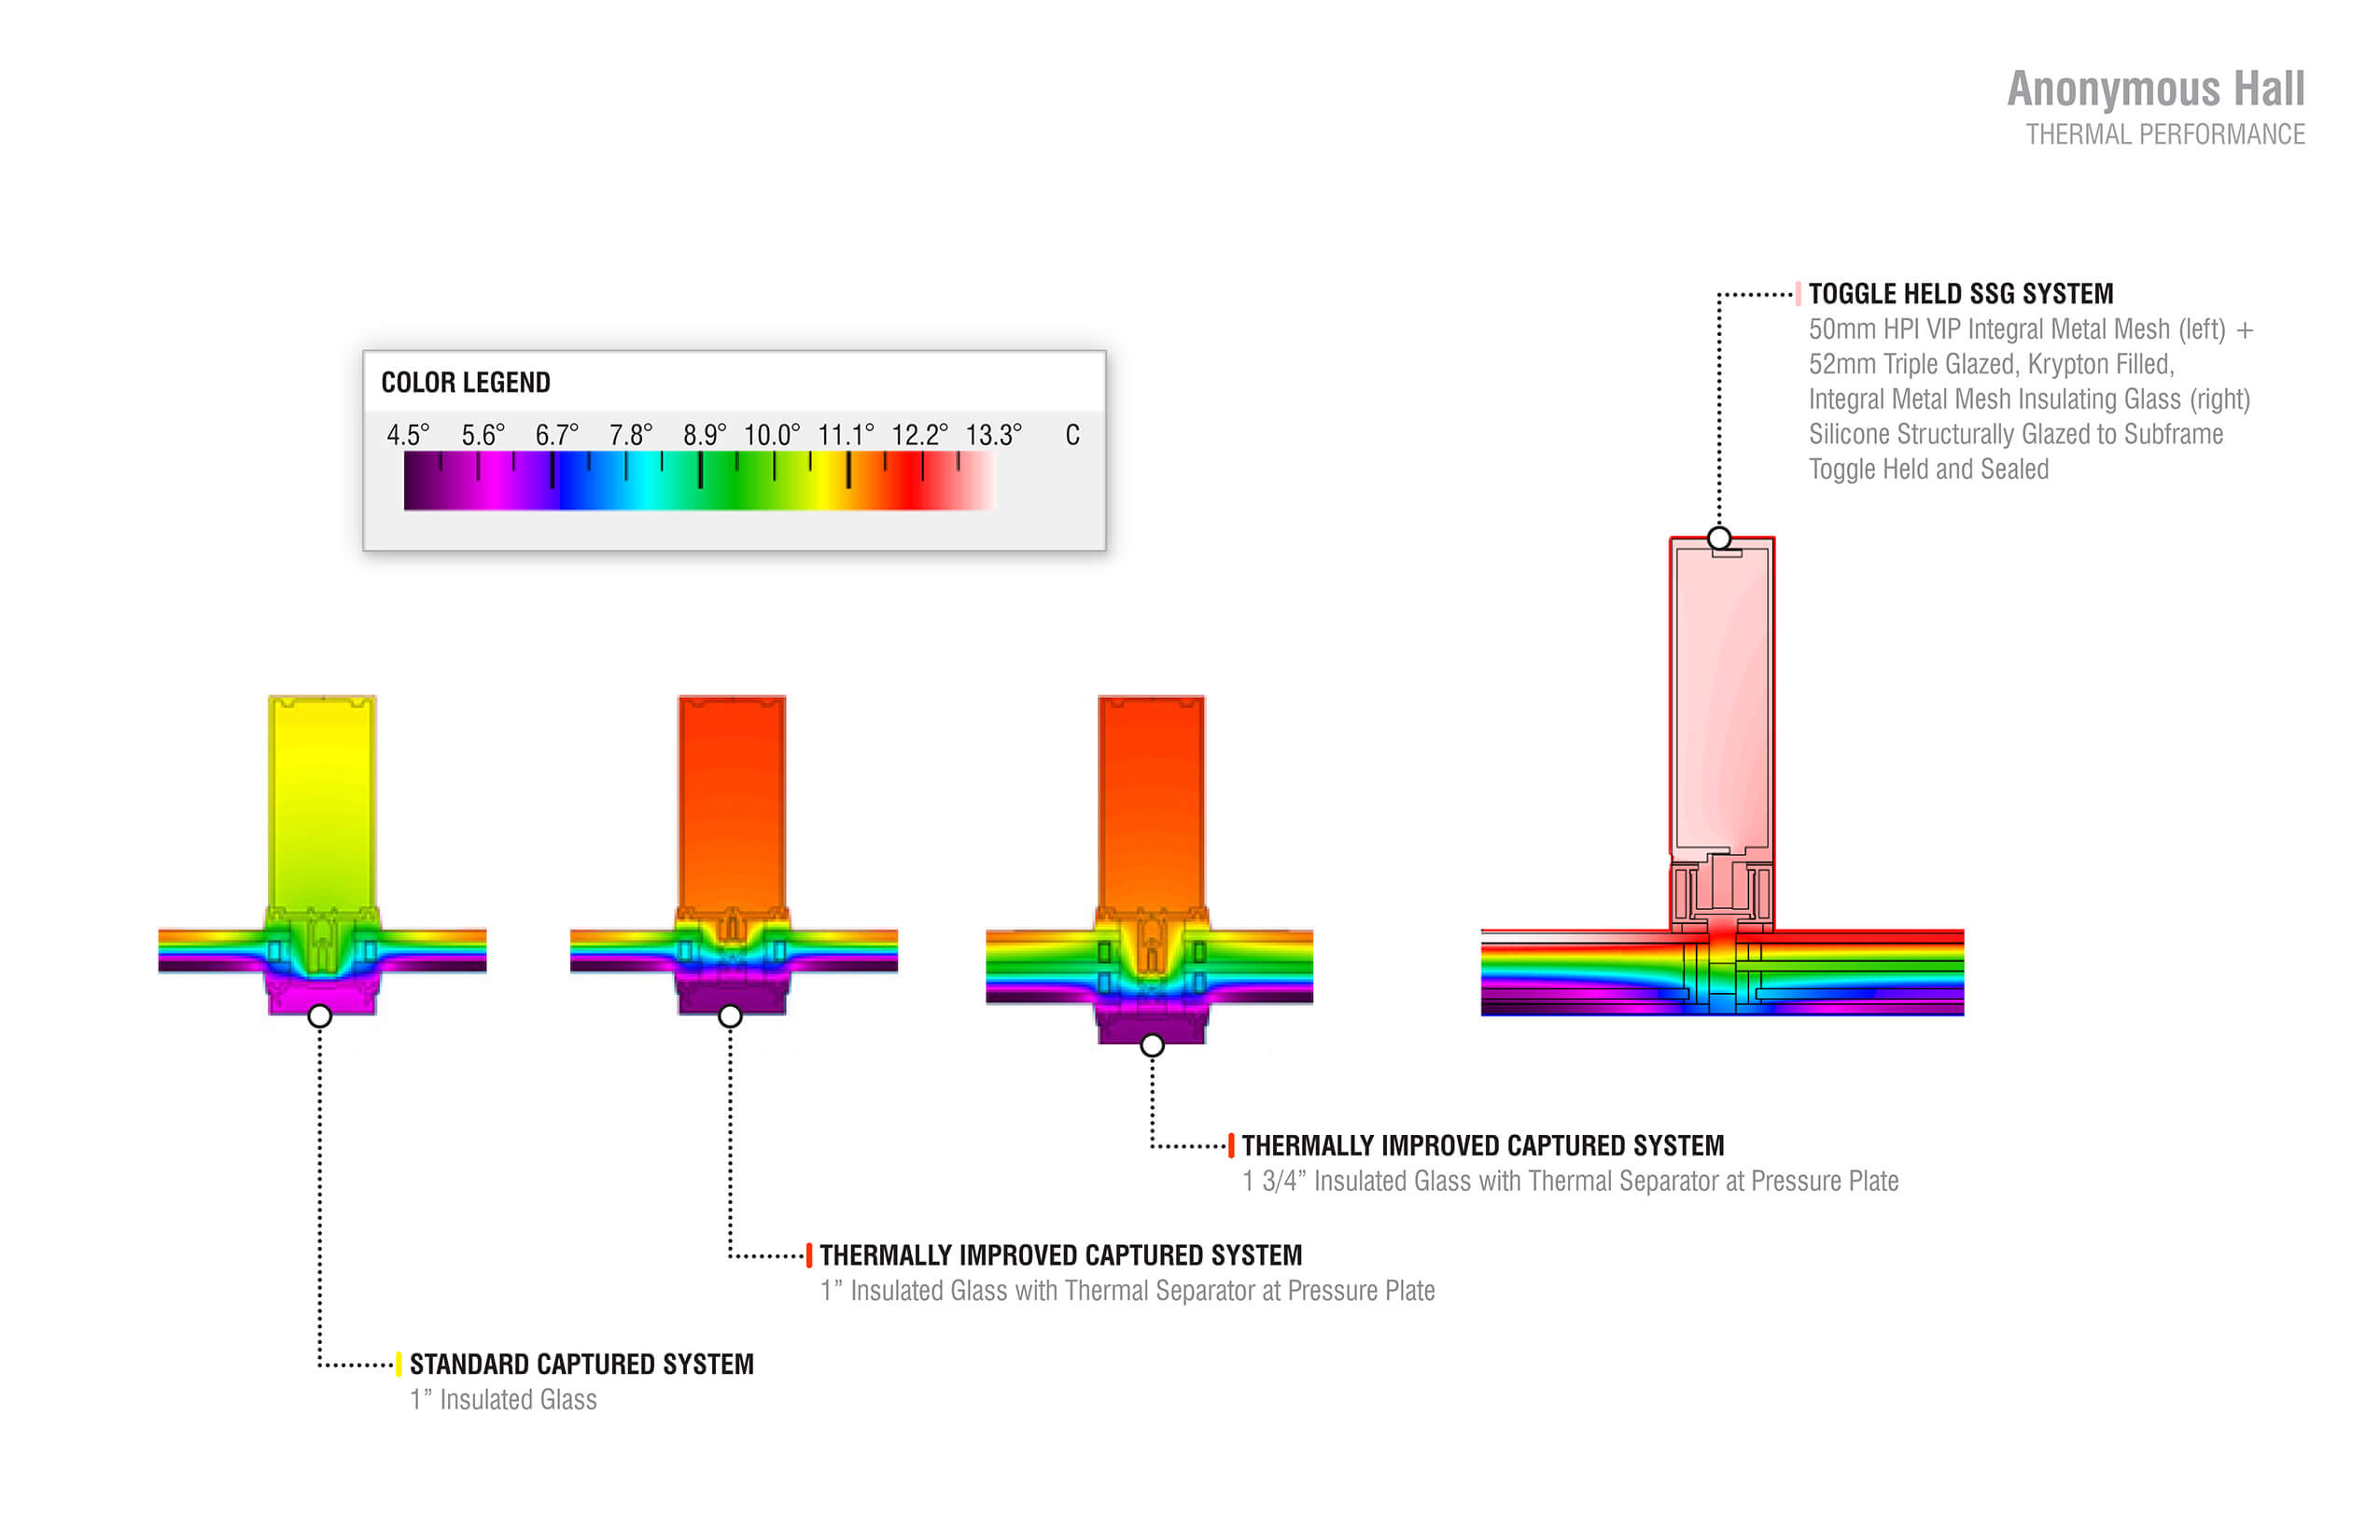 A diagram showing comparisons between thermal insulation 